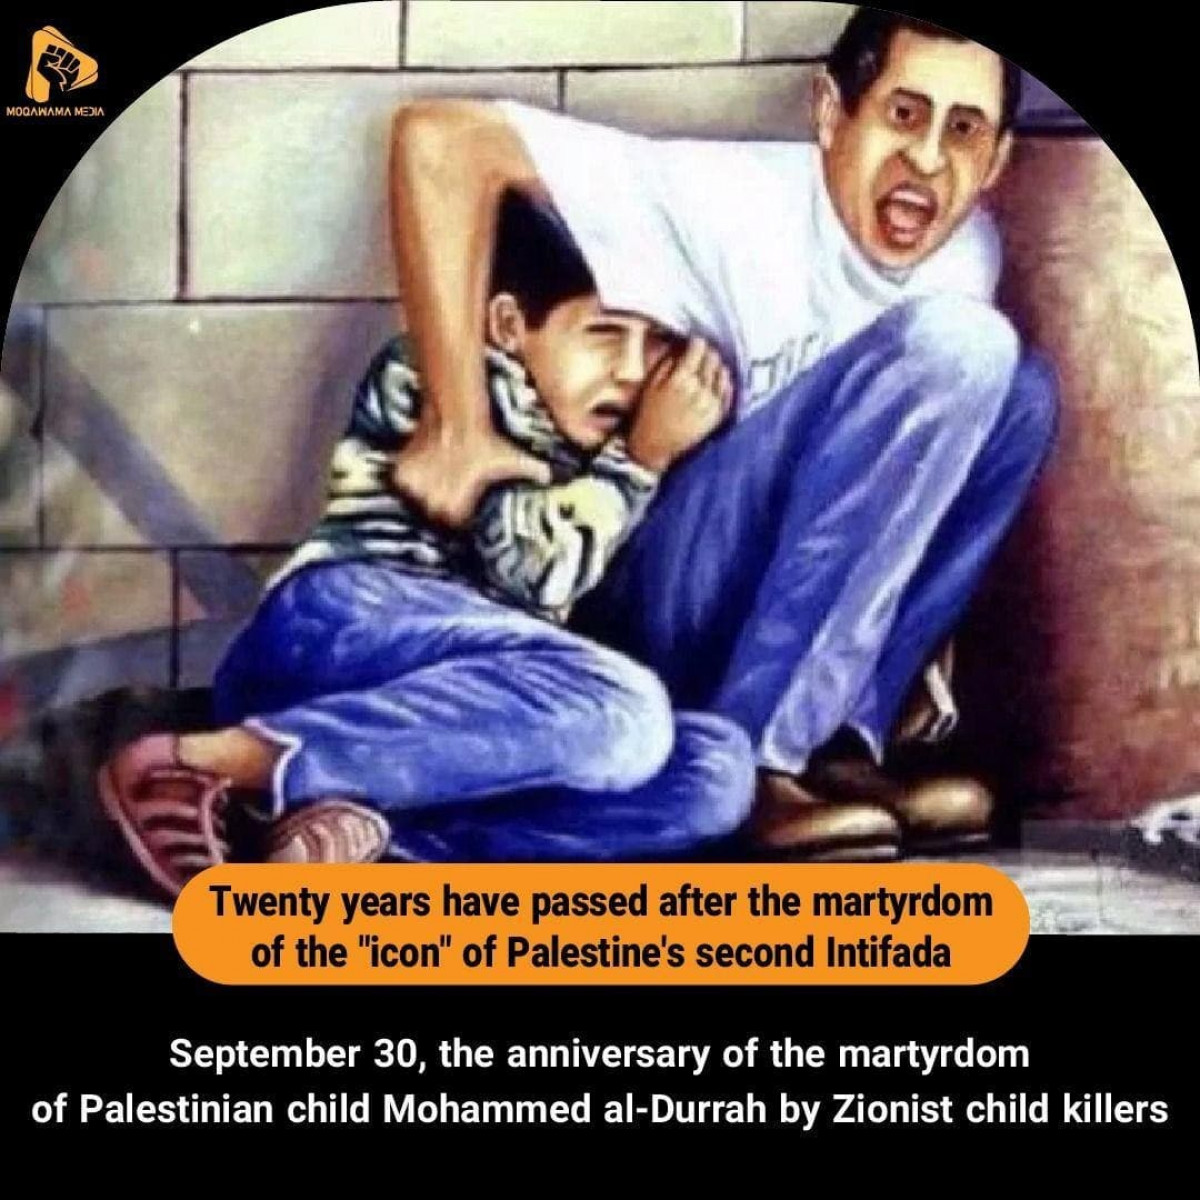 Twenty years have passed after the martyrdom of the "icon" of Palestine's second Intifad